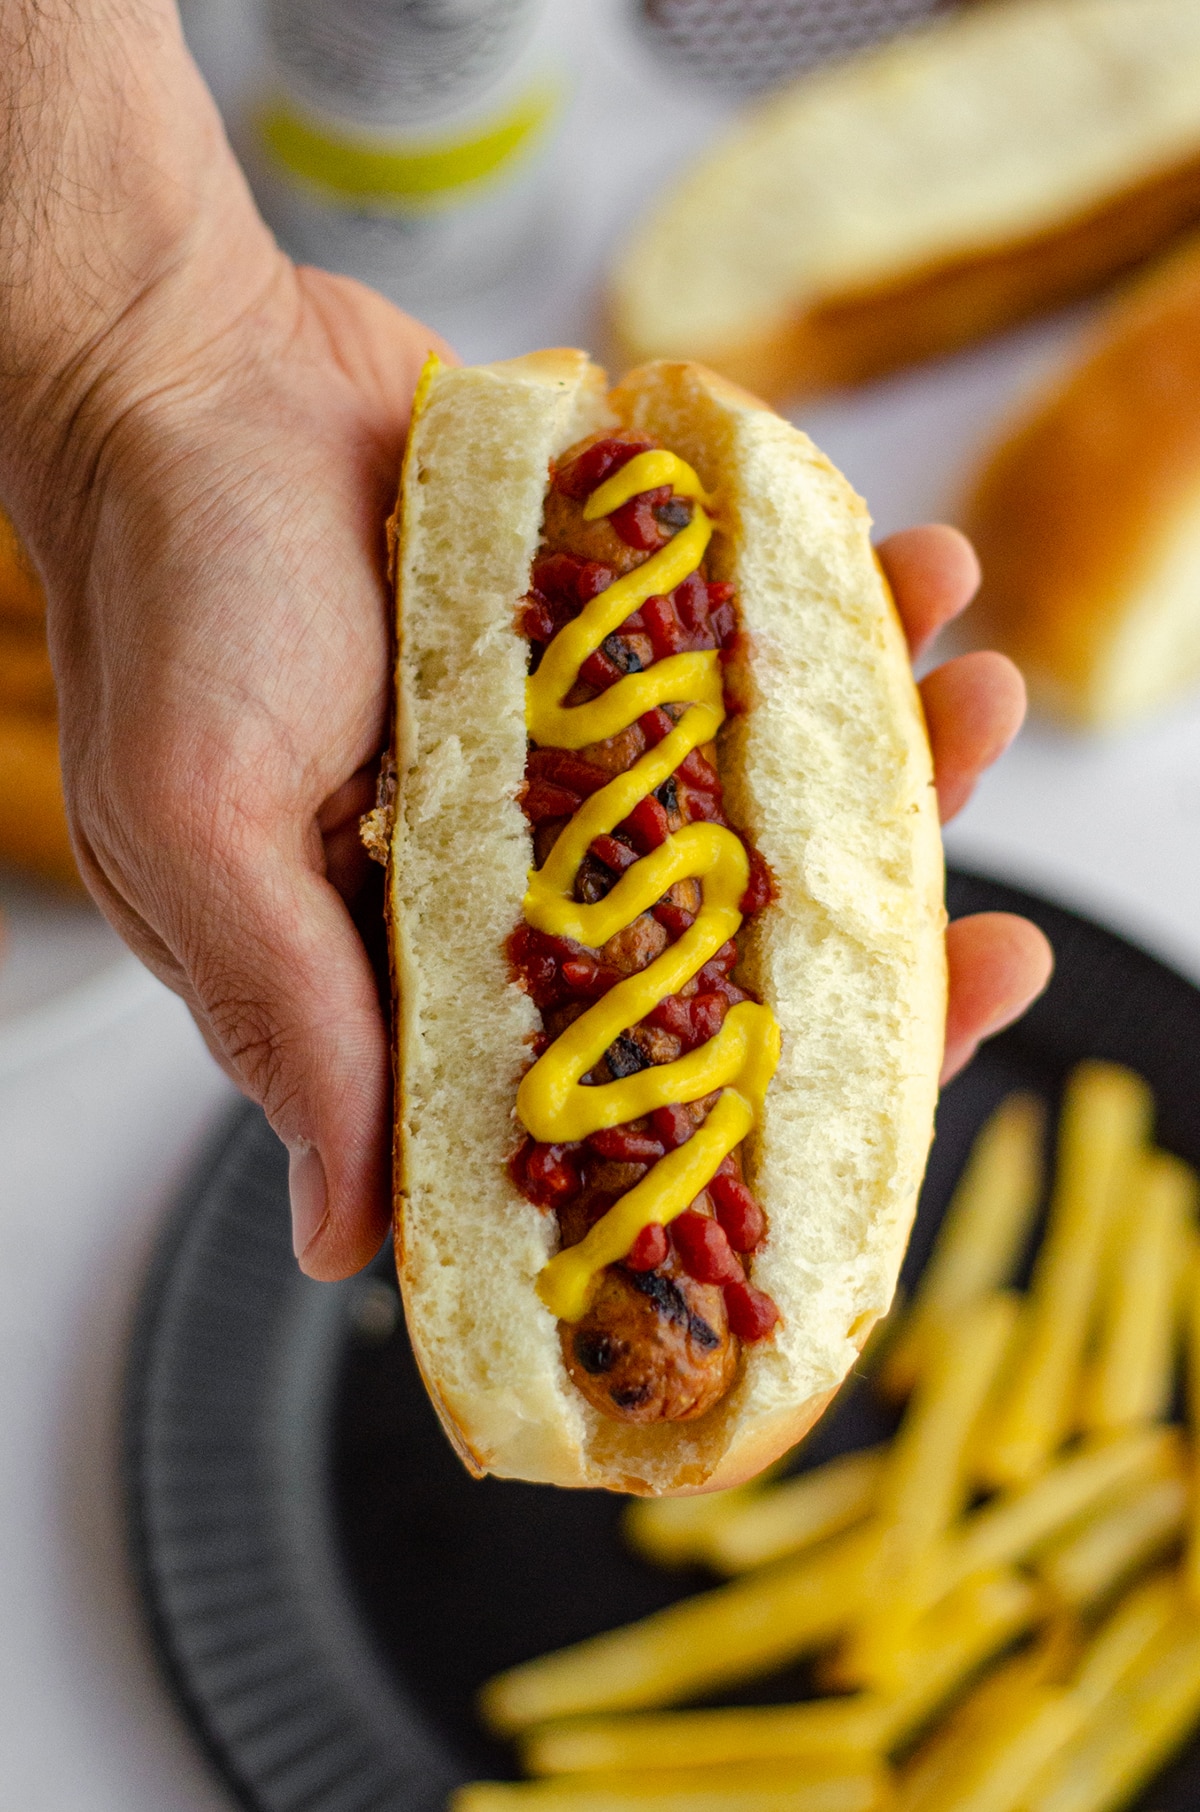 hand holding a hot dog in a homemade hot dog bun with a squirts of ketchup and mustard